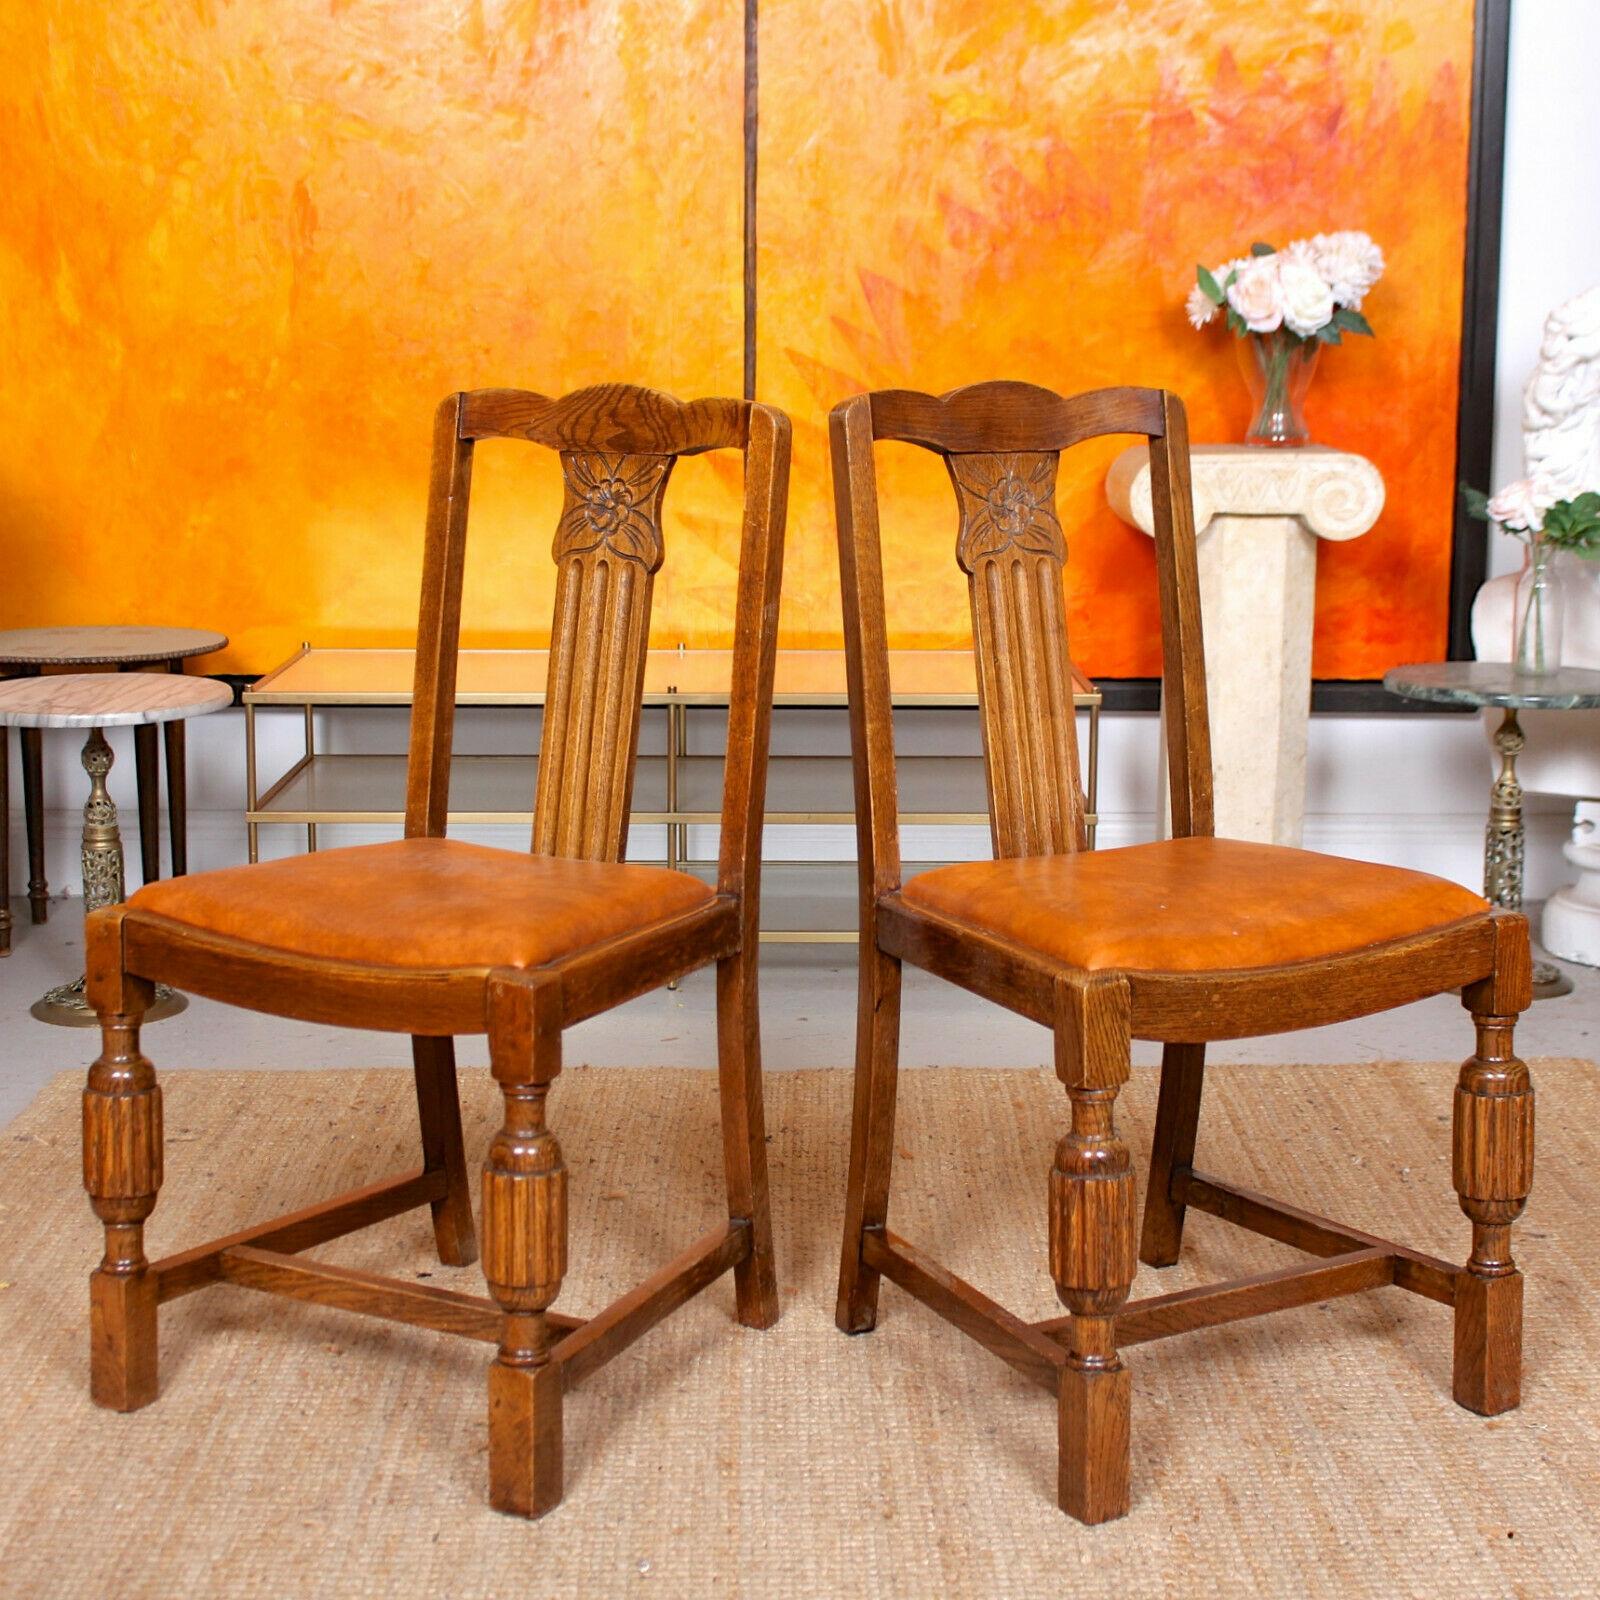 English Oak Dining Table and 6 Chairs Country Arts & Crafts 2